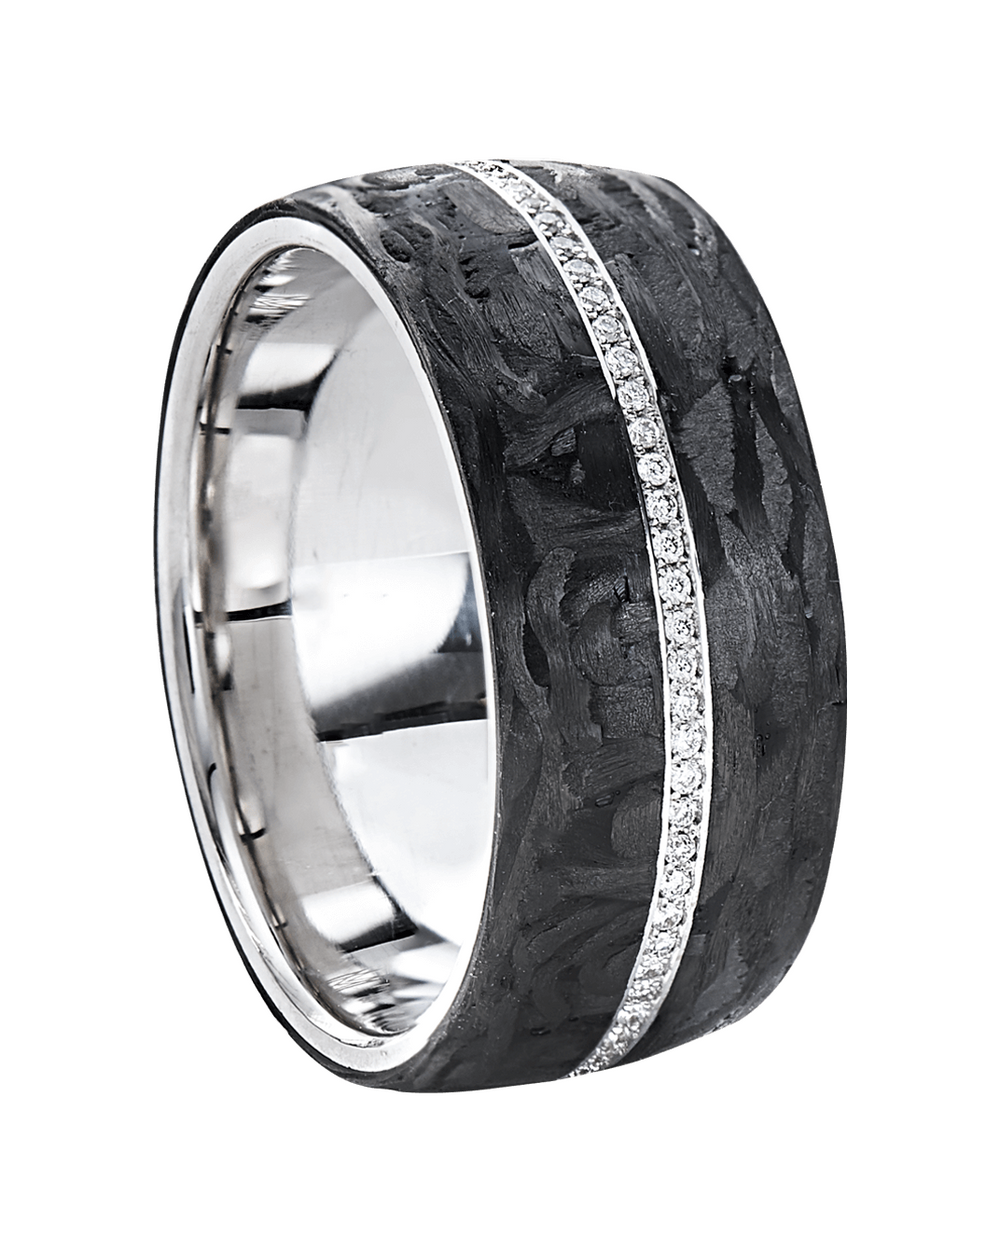 Wedding Band with Diamonds and Black Carbon